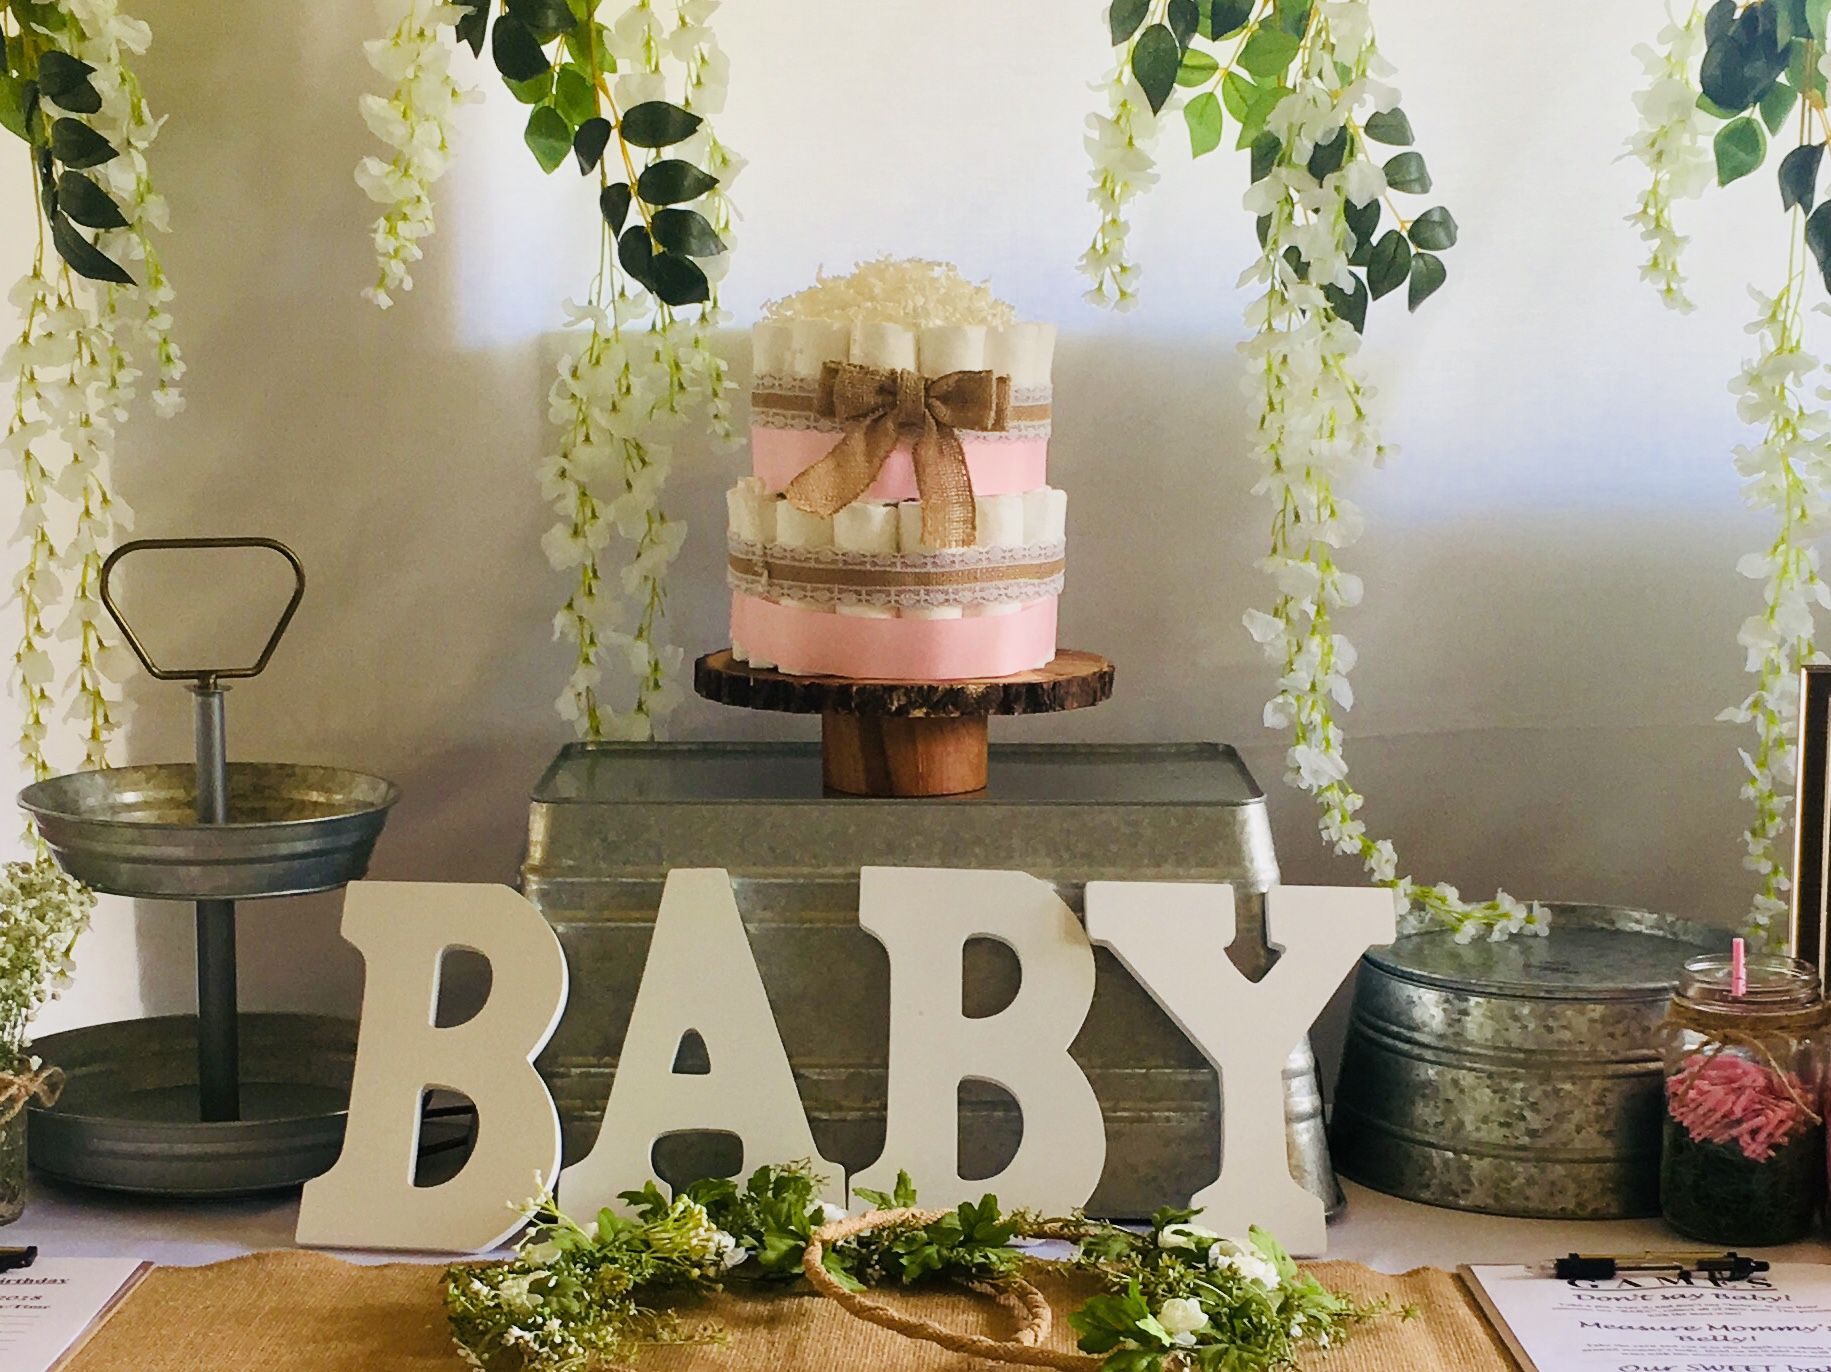 Baby shower/wedding/party decorations